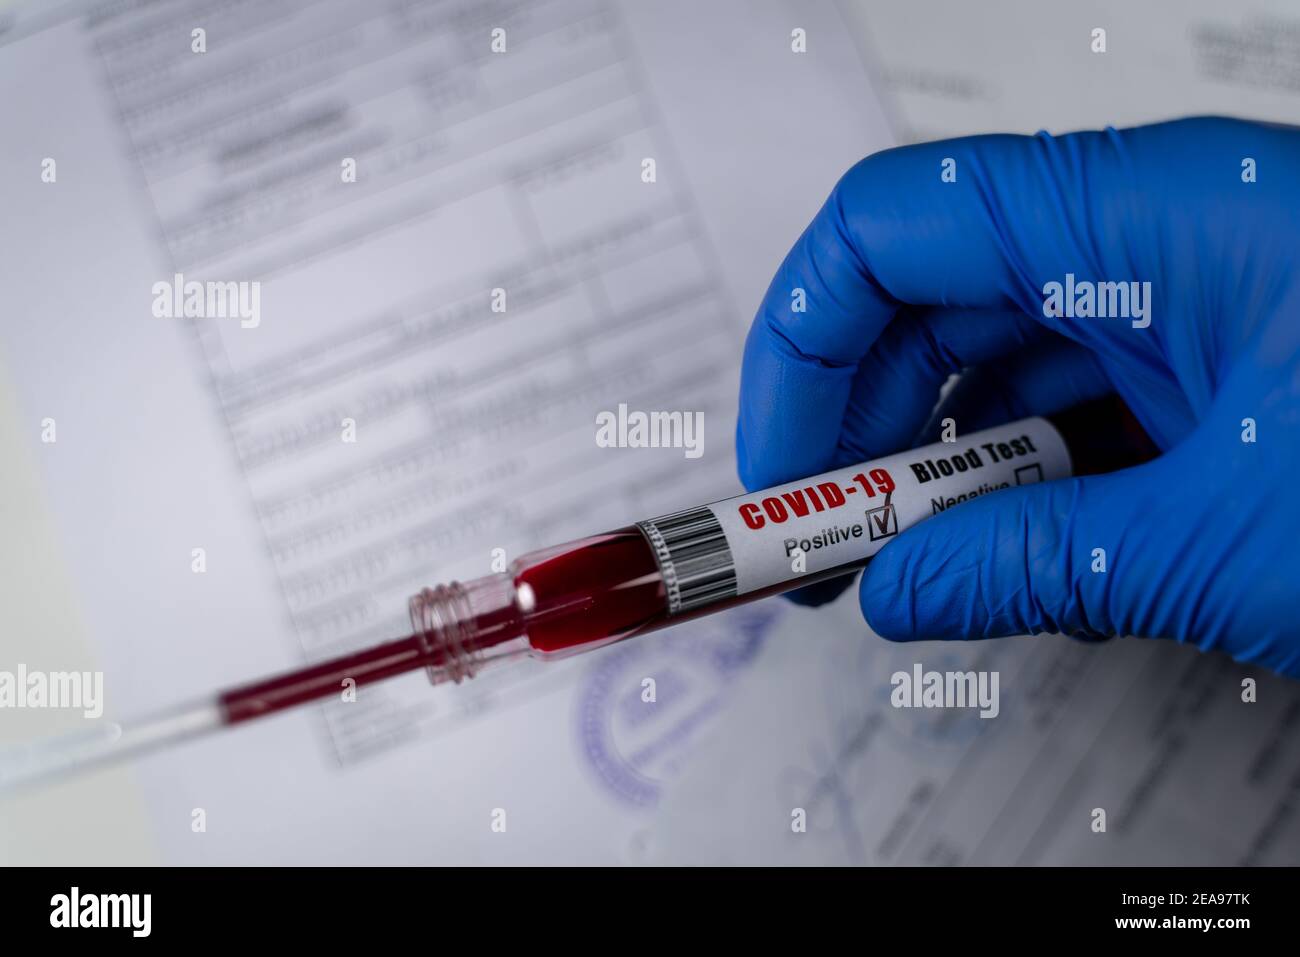 Pipette extracting sample from blood collection tube with positive result for COVID 19. Isolated on background of medical papers. Coronavirus Stock Photo